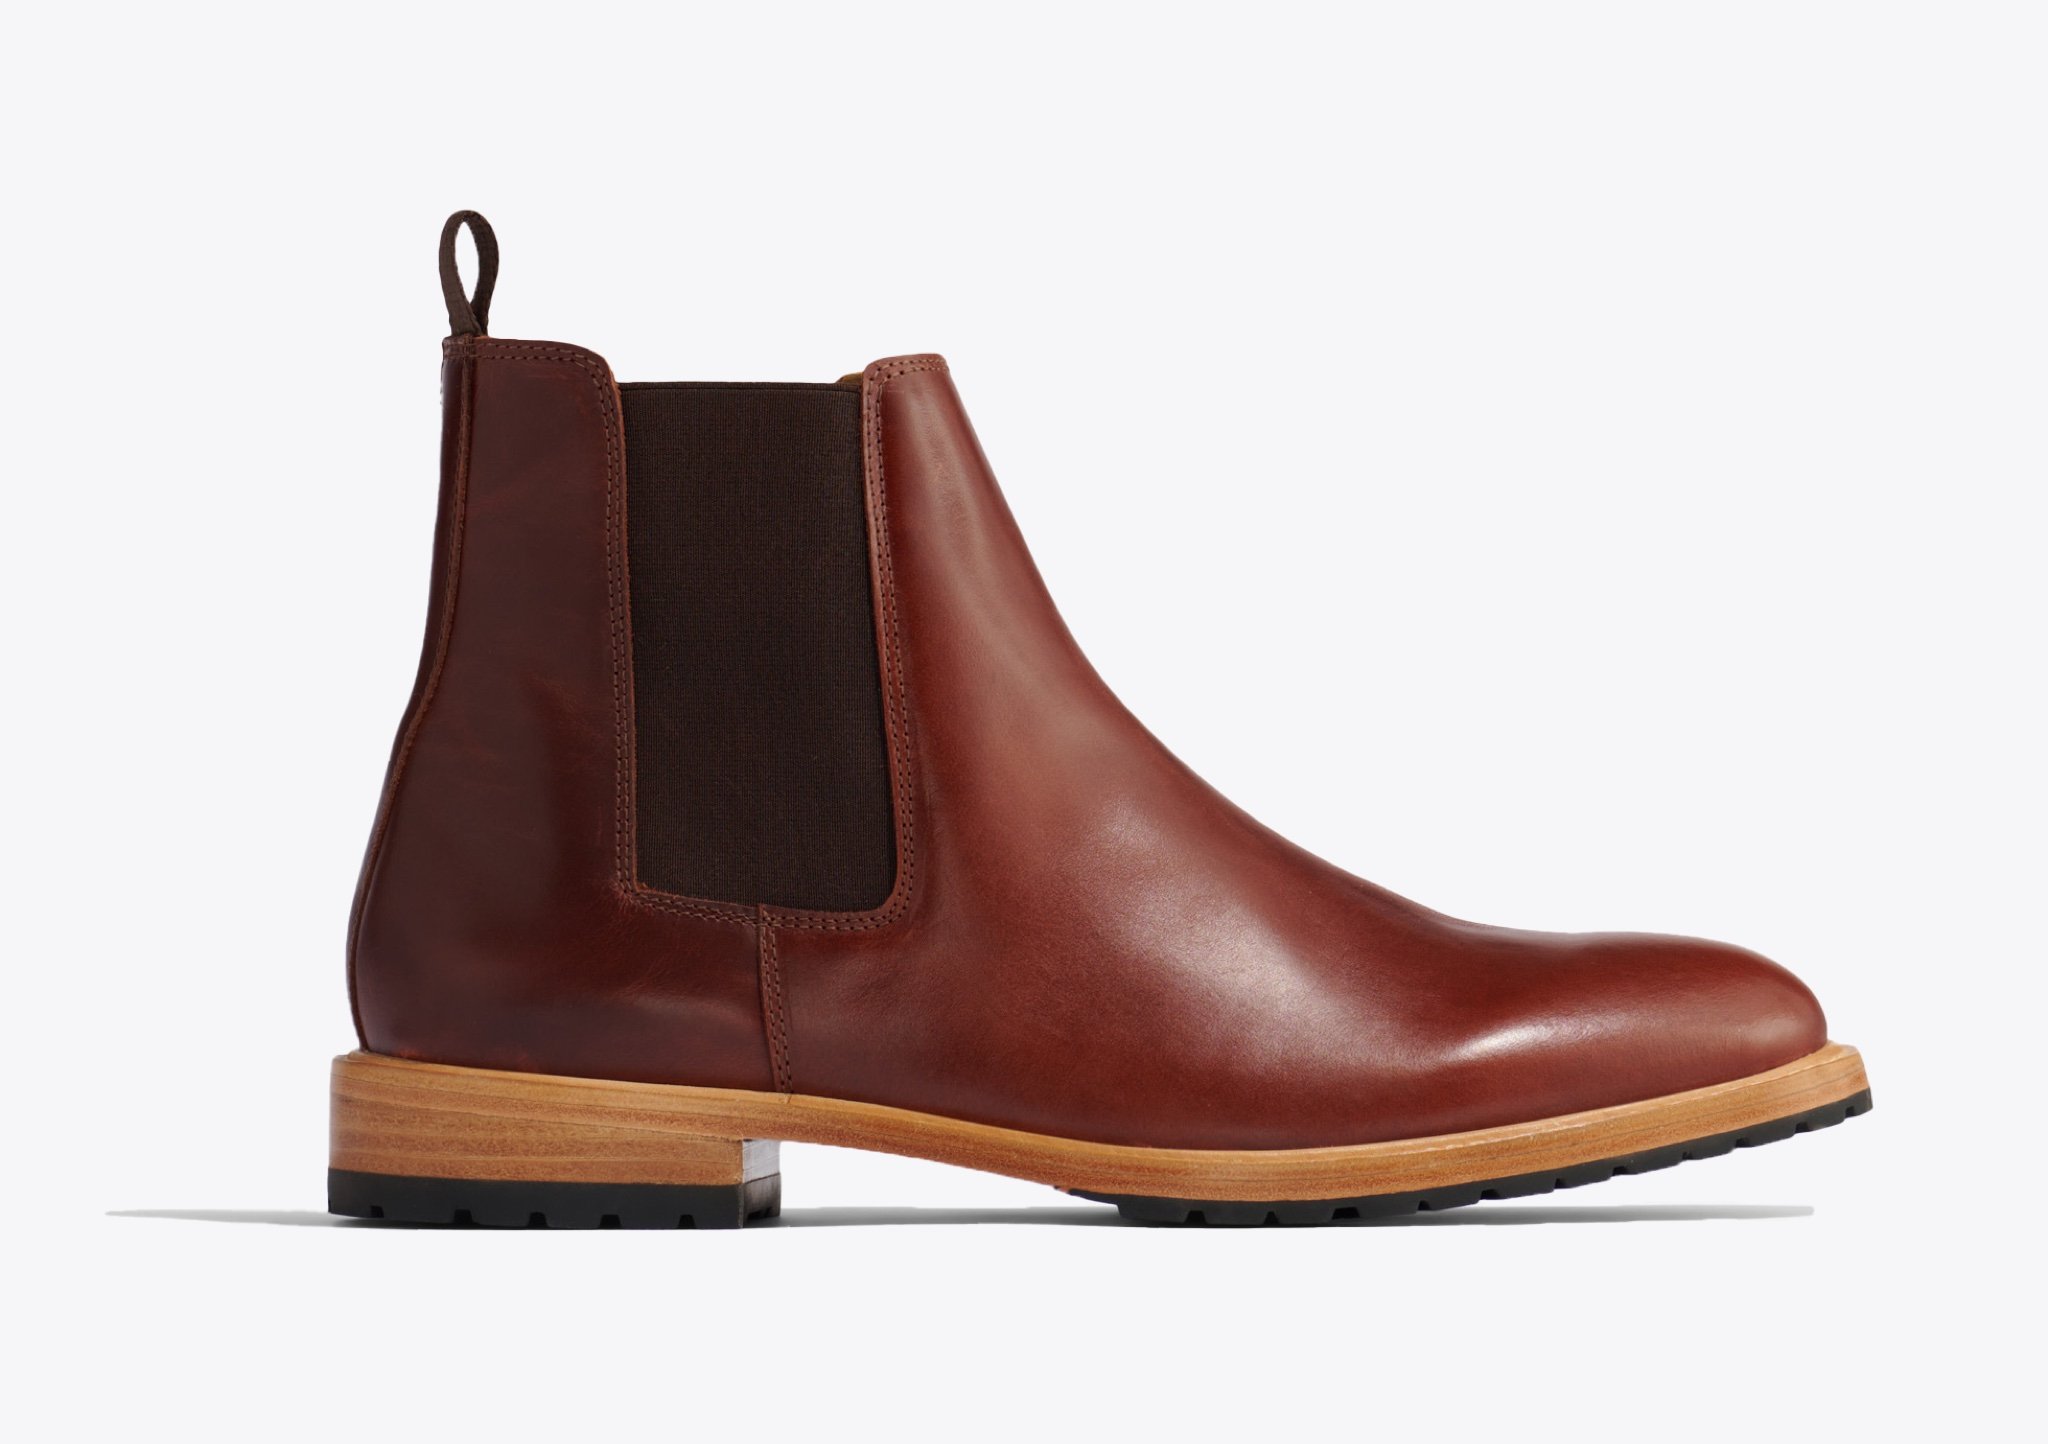 Nisolo Marco Everyday Chelsea Boot Mahogany - Every Nisolo product is built on the foundation of comfort, function, and design. 